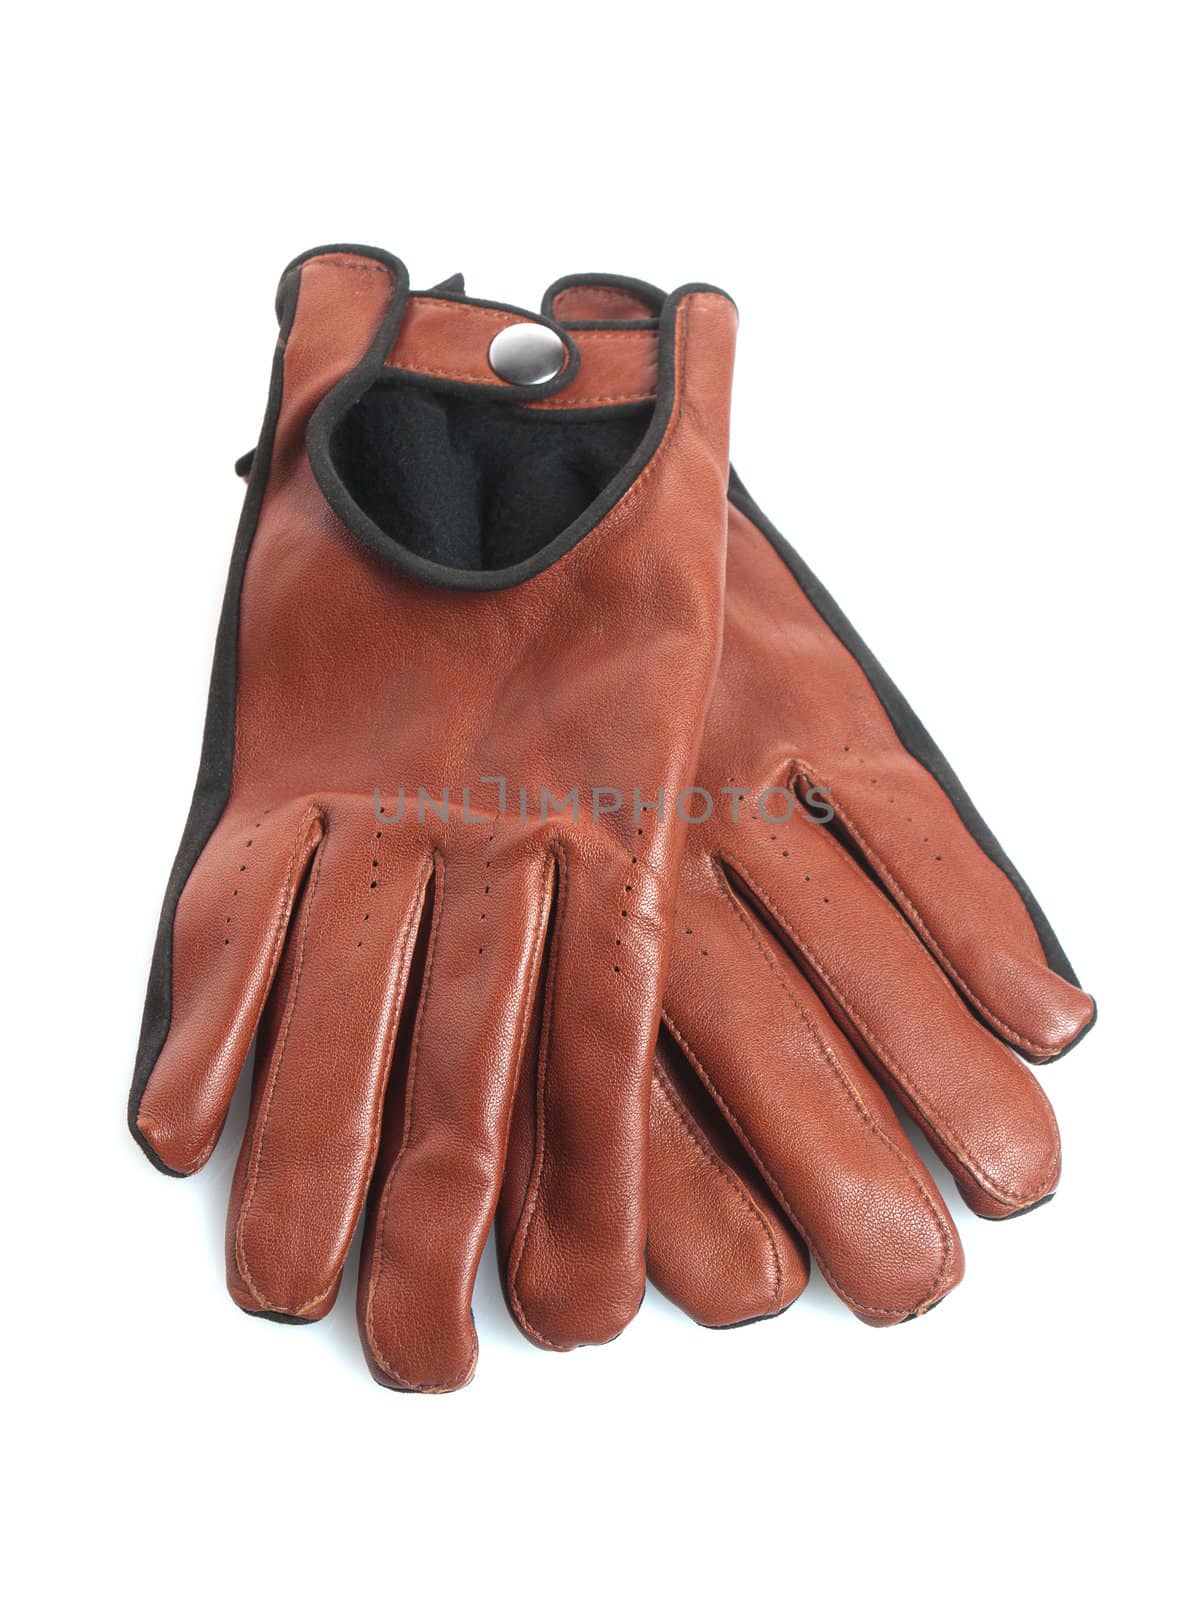 Mens  brown leather gloves on white background